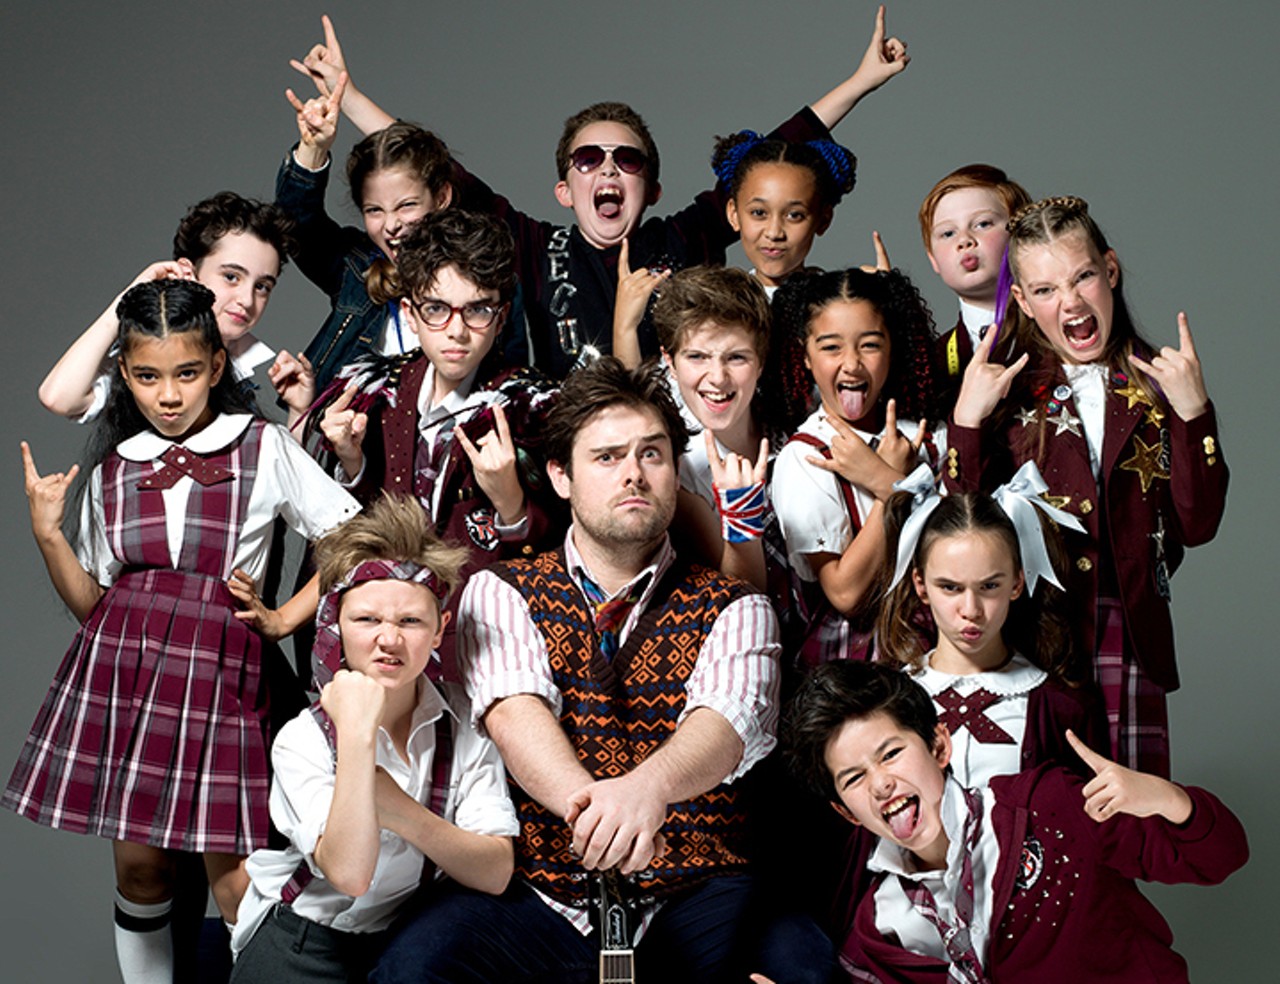 Tuesday, Dec. 26School of Rock opens at the Dr. Phillips Center for the Performing Arts